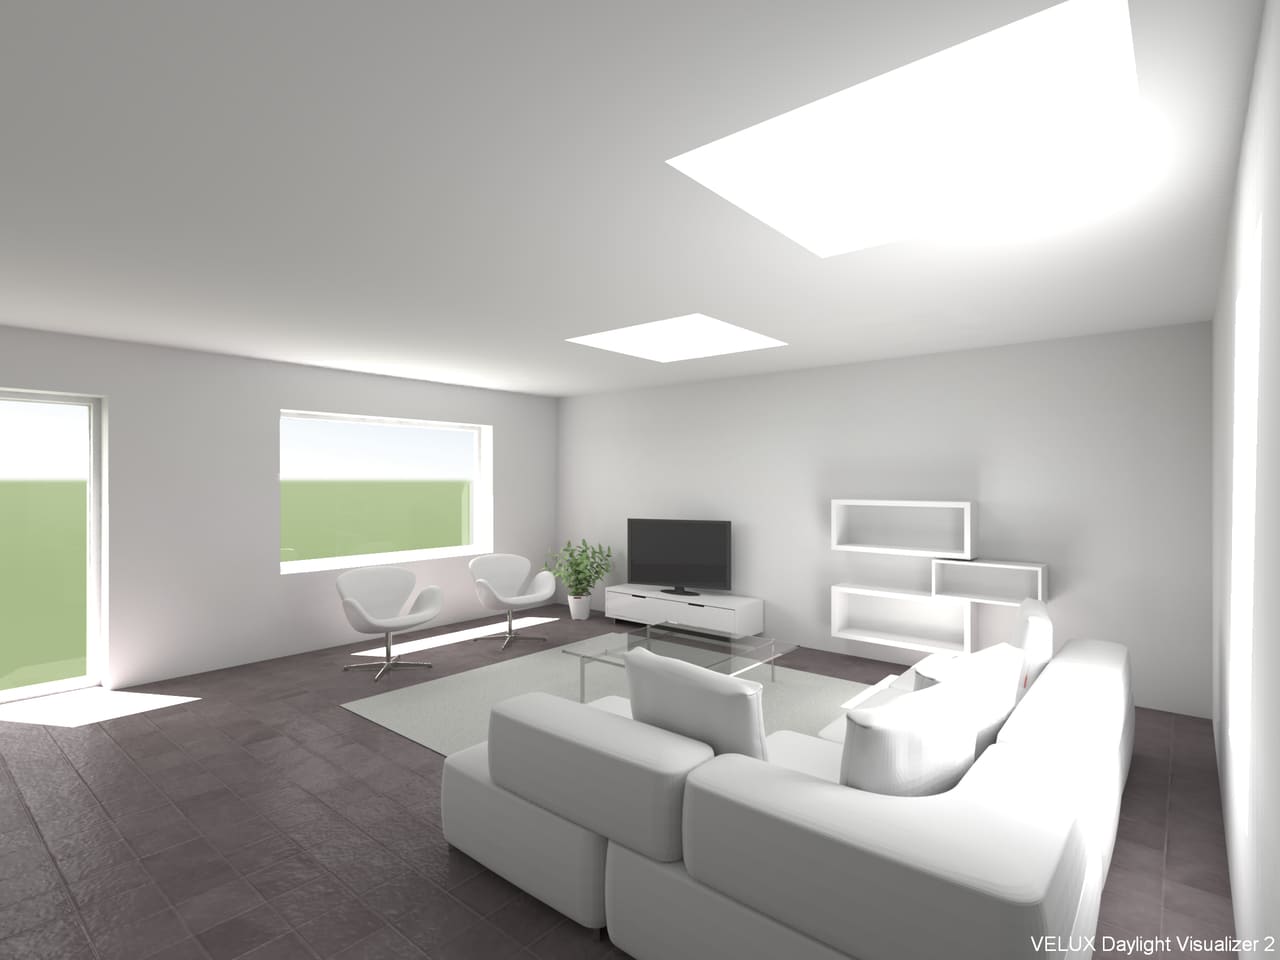 Visualization of white painted living room with a flat roof window